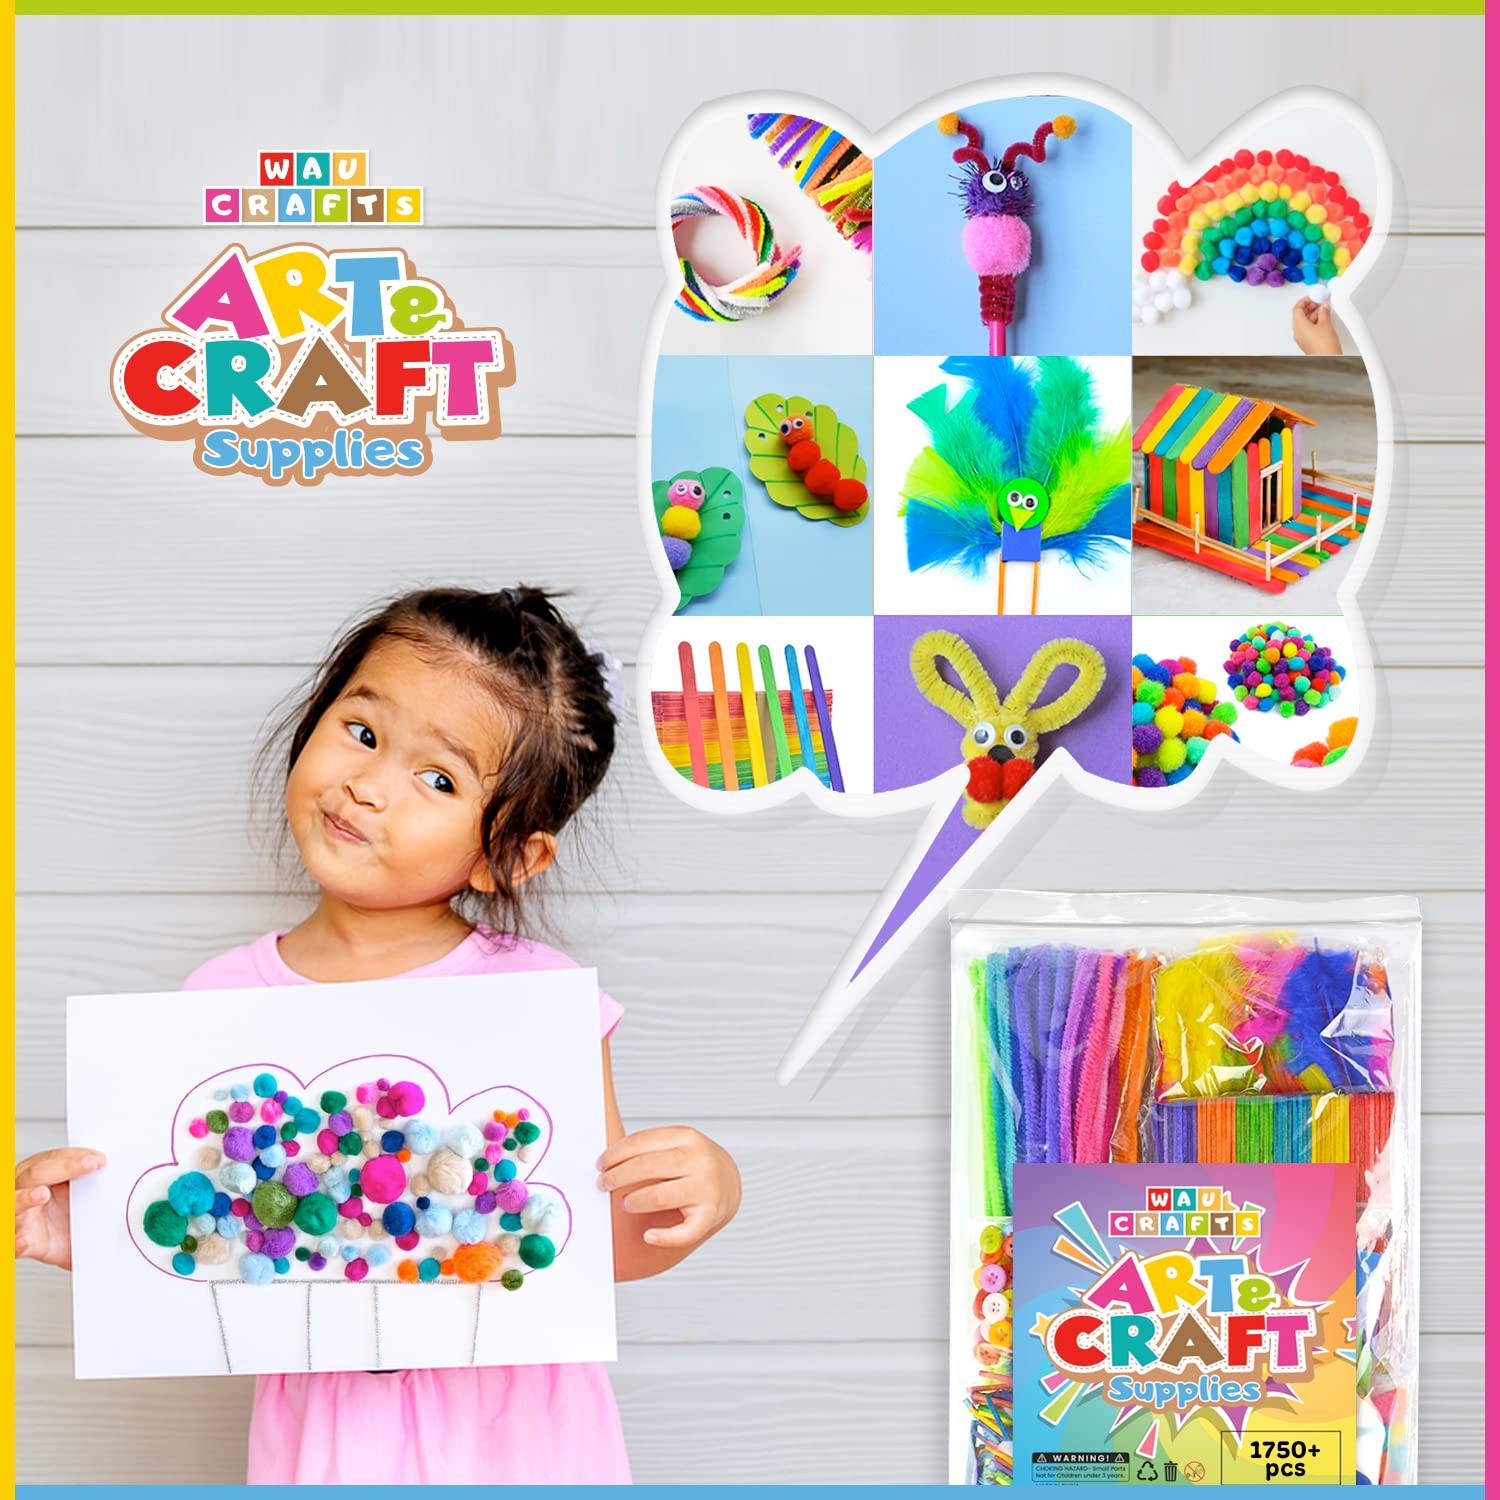 WAU CRAFTS Arts and Crafts Supplies for Kids - 1750 pcs Crafting for School Kindergarten Homeschool - Supplies Set for Kids Craft Art - Supply Kit for Toddlers and Kids Age 2 3 4 5 6 7 8 9